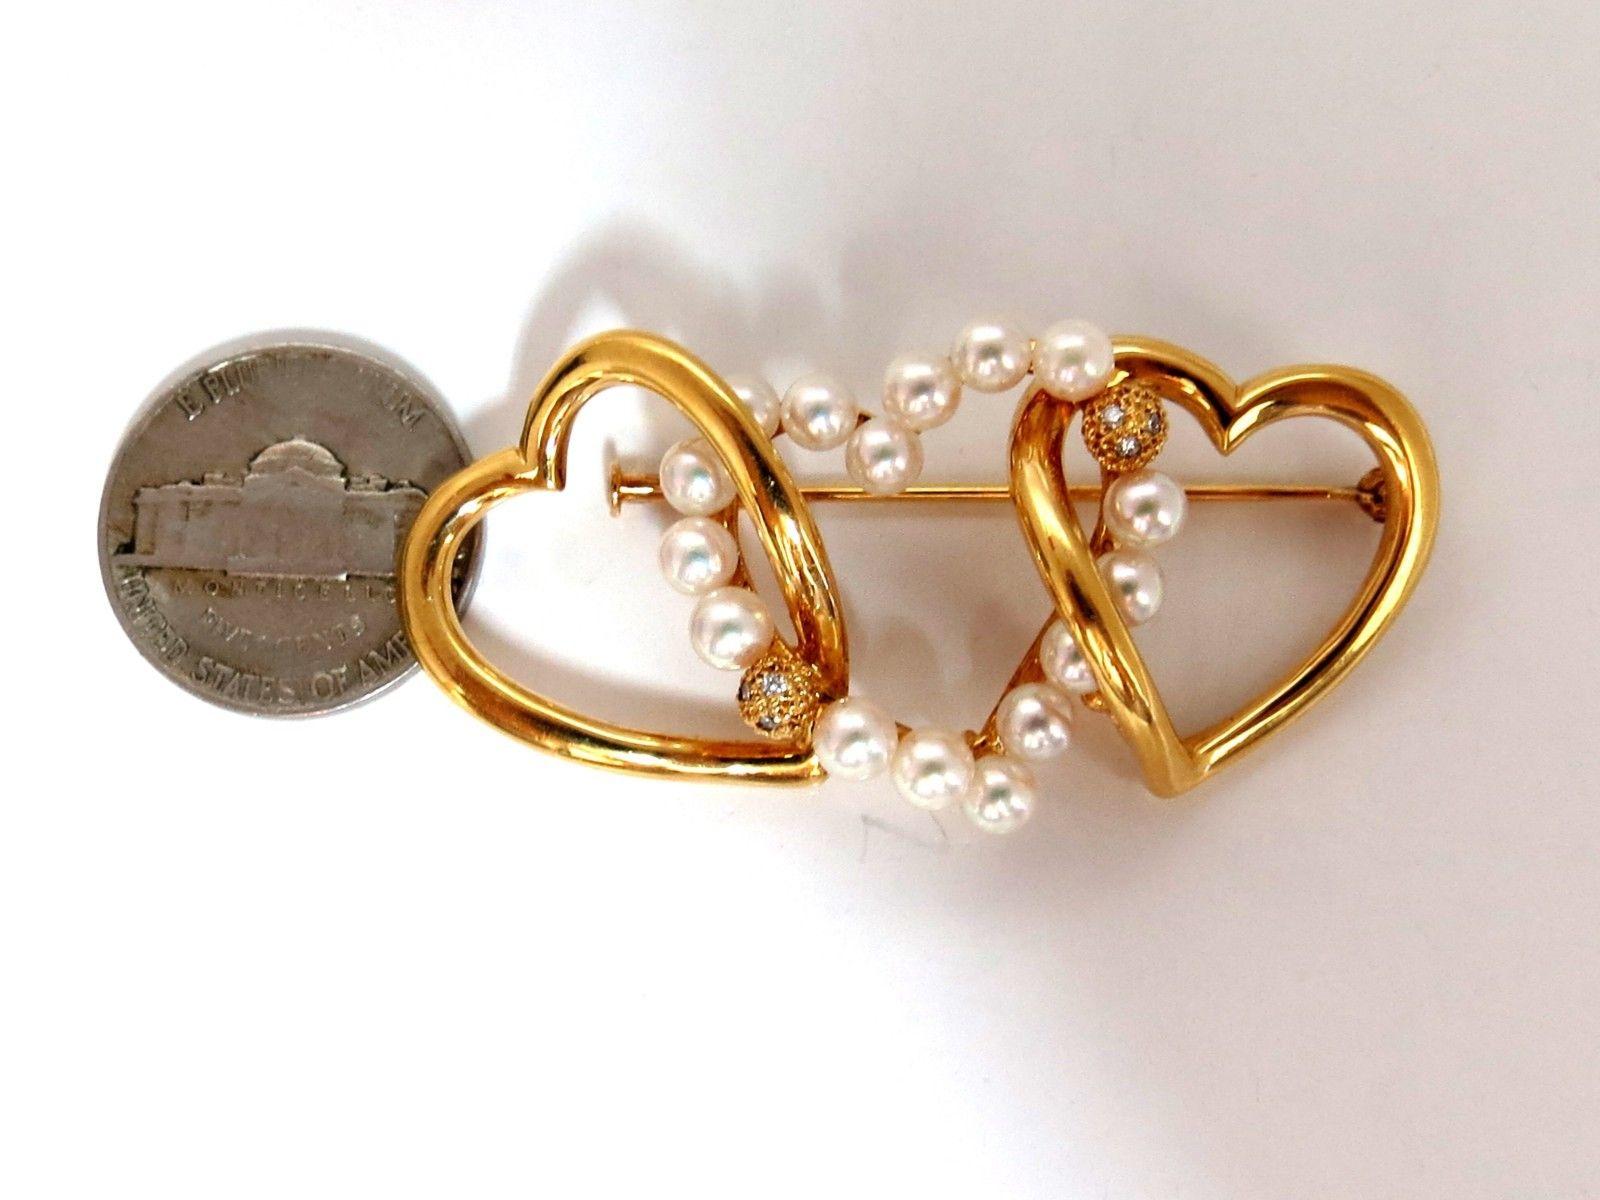 Three Heart Love

Vintage Medallion Pearl Pendant Brooch 

.10ct natural diamonds within gold balls

4mm Cultured pearls

18kt yellow gold

15 grams

55 x 27mm